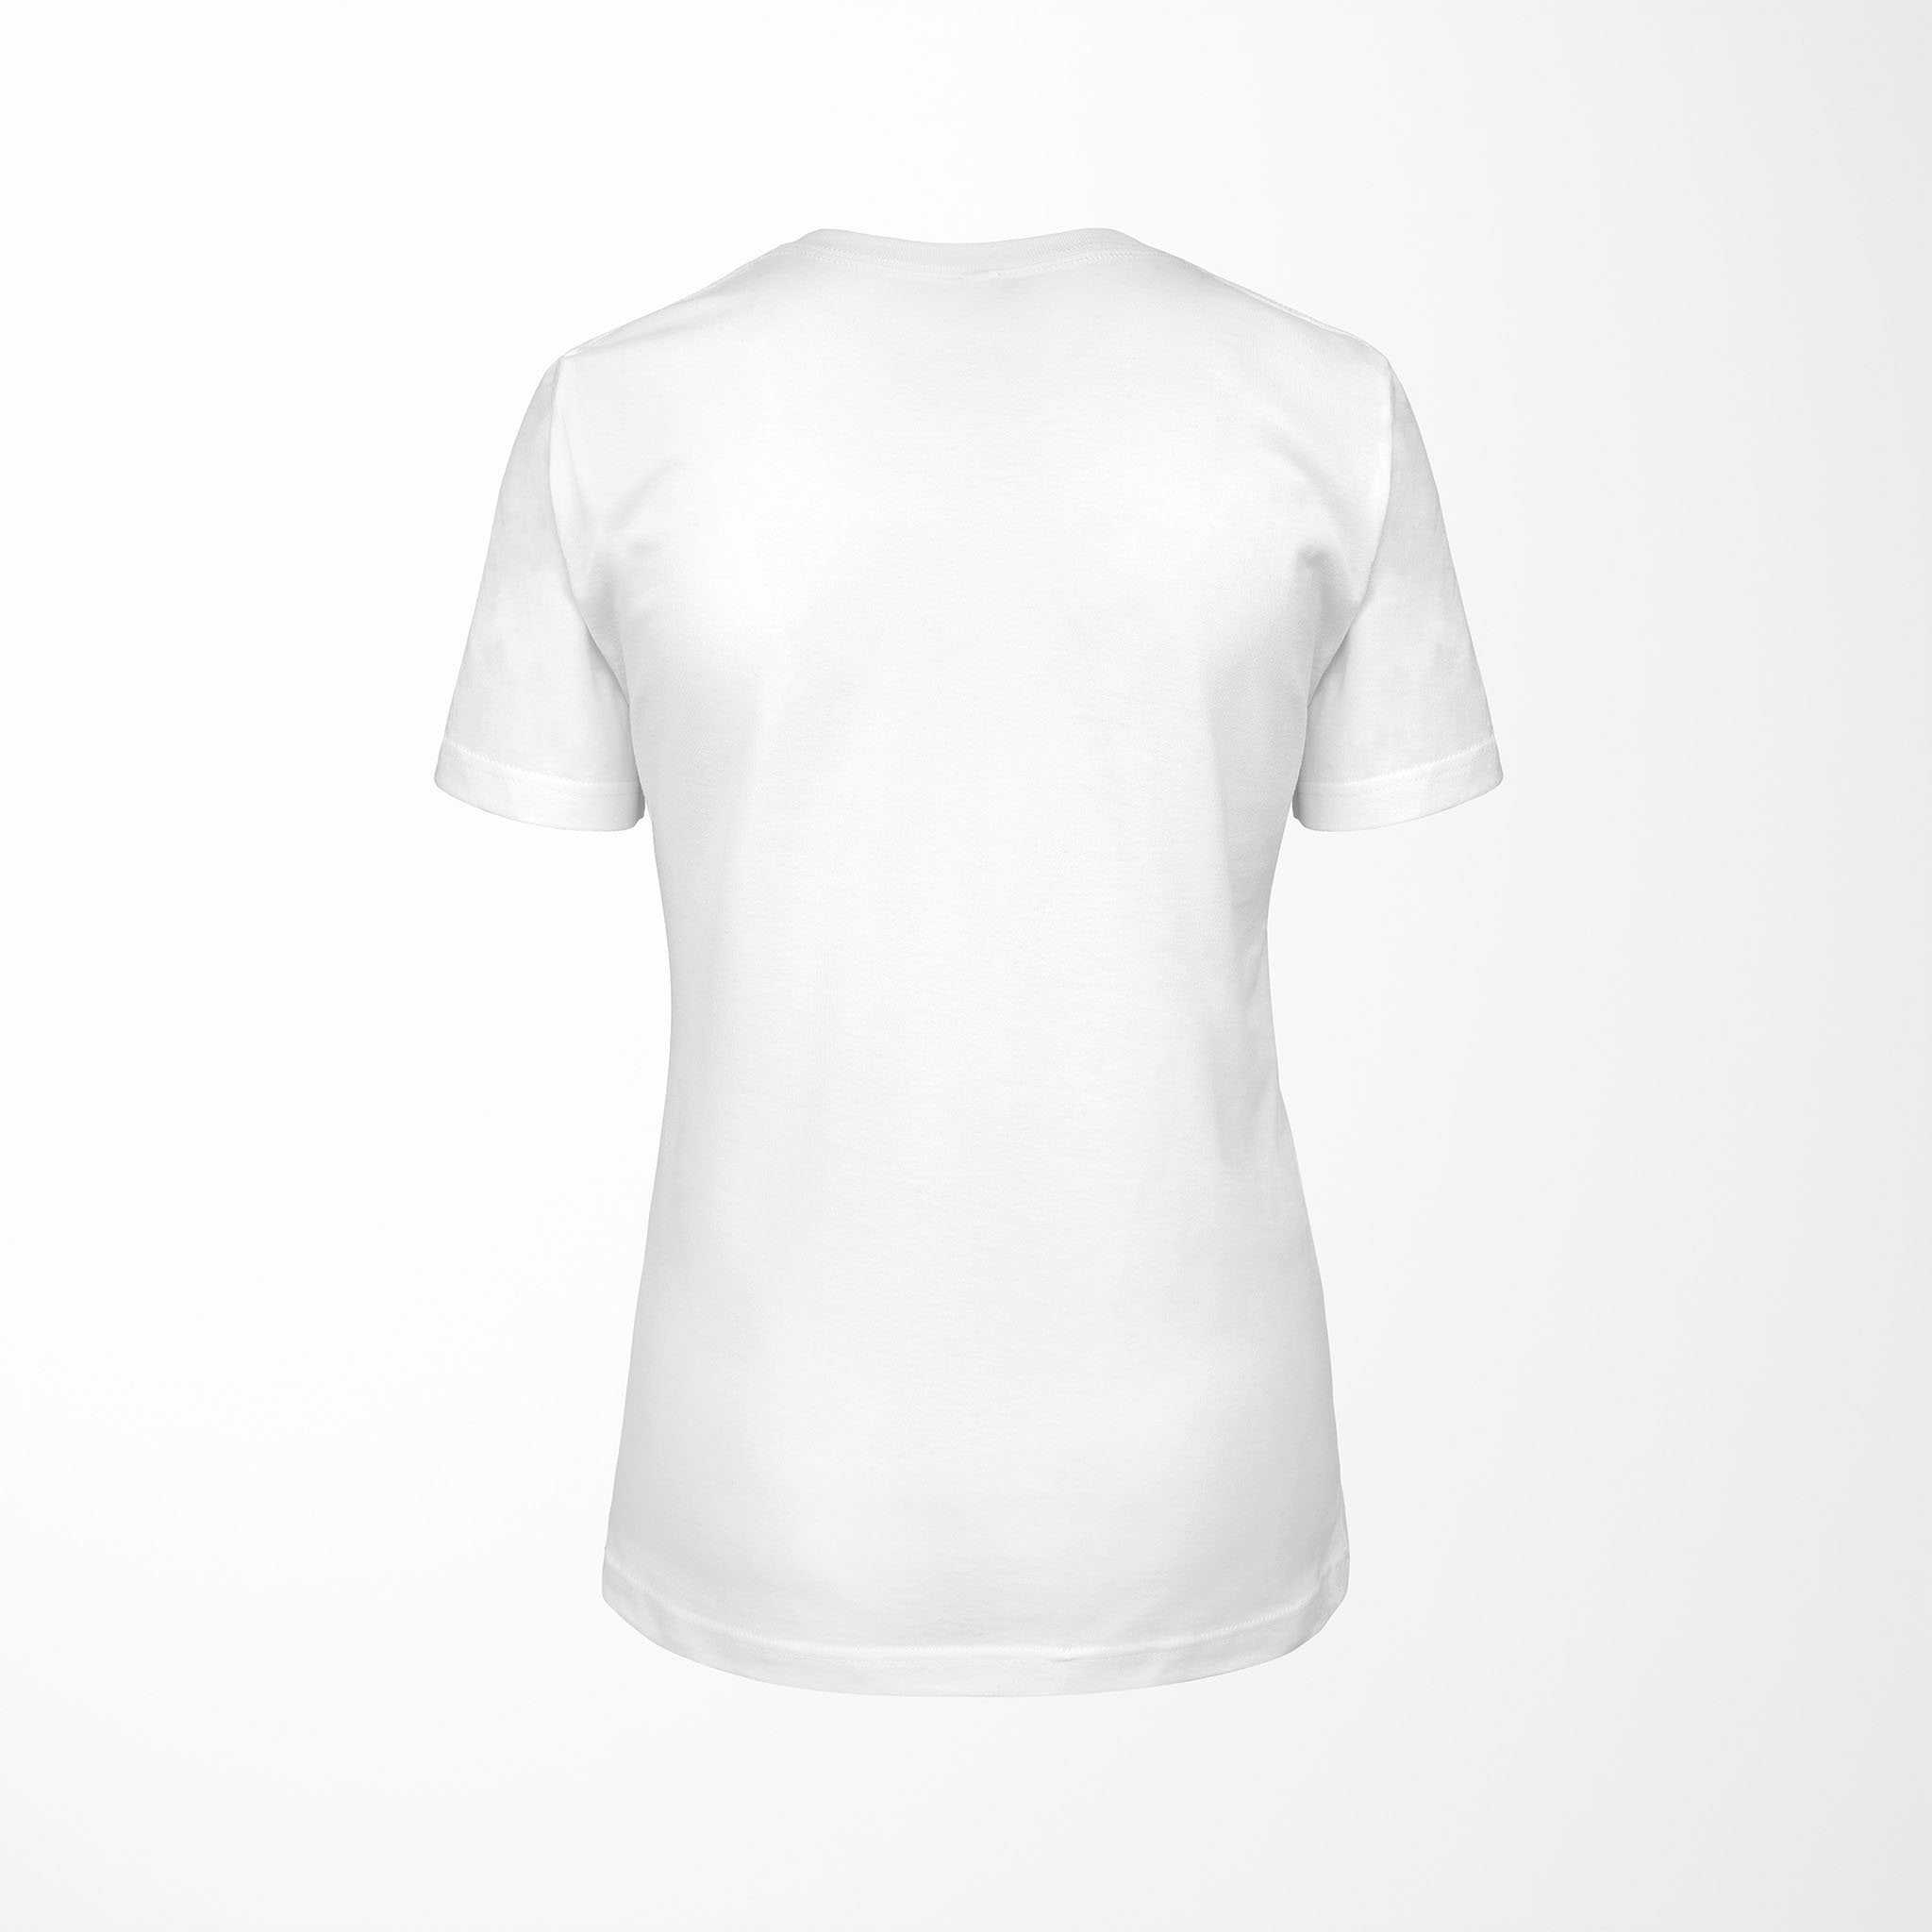 STRIKE Relaxed Fit Women's 100% Cotton White T-Shirt back